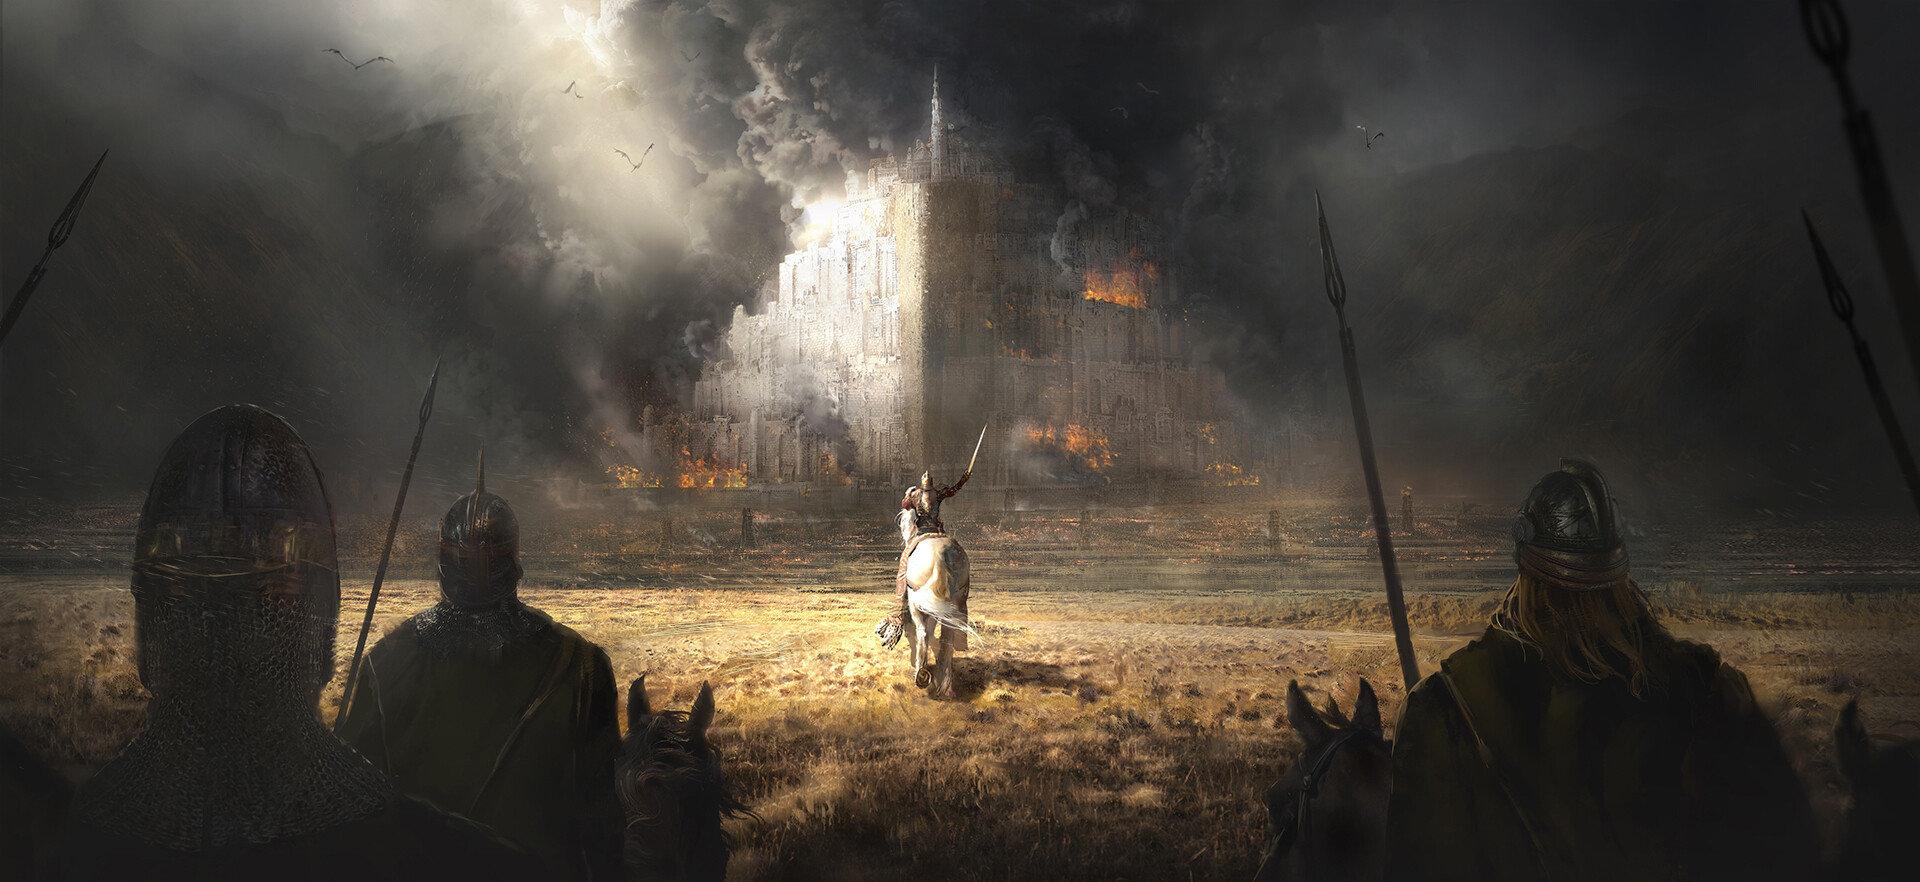 General 1920x882 The Lord of the Rings Minas Tirith fantasy art artwork Théoden J. R. R. Tolkien